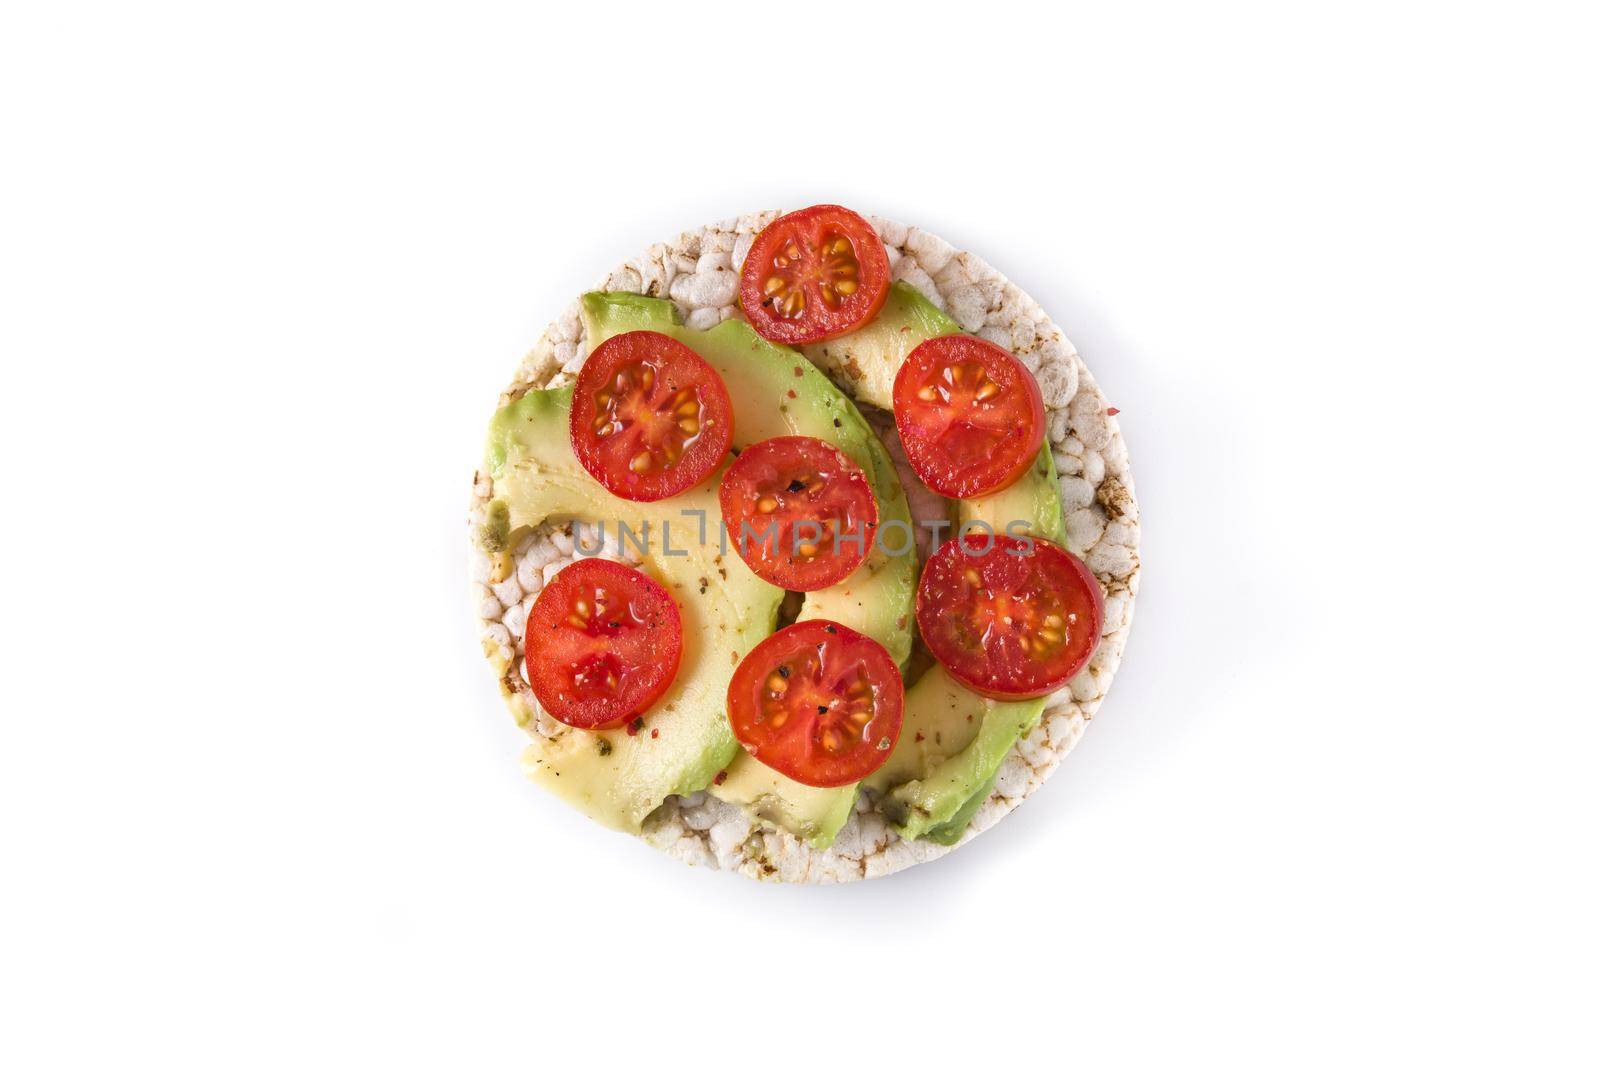 Puffed rice cake with tomatoes and avocado by chandlervid85